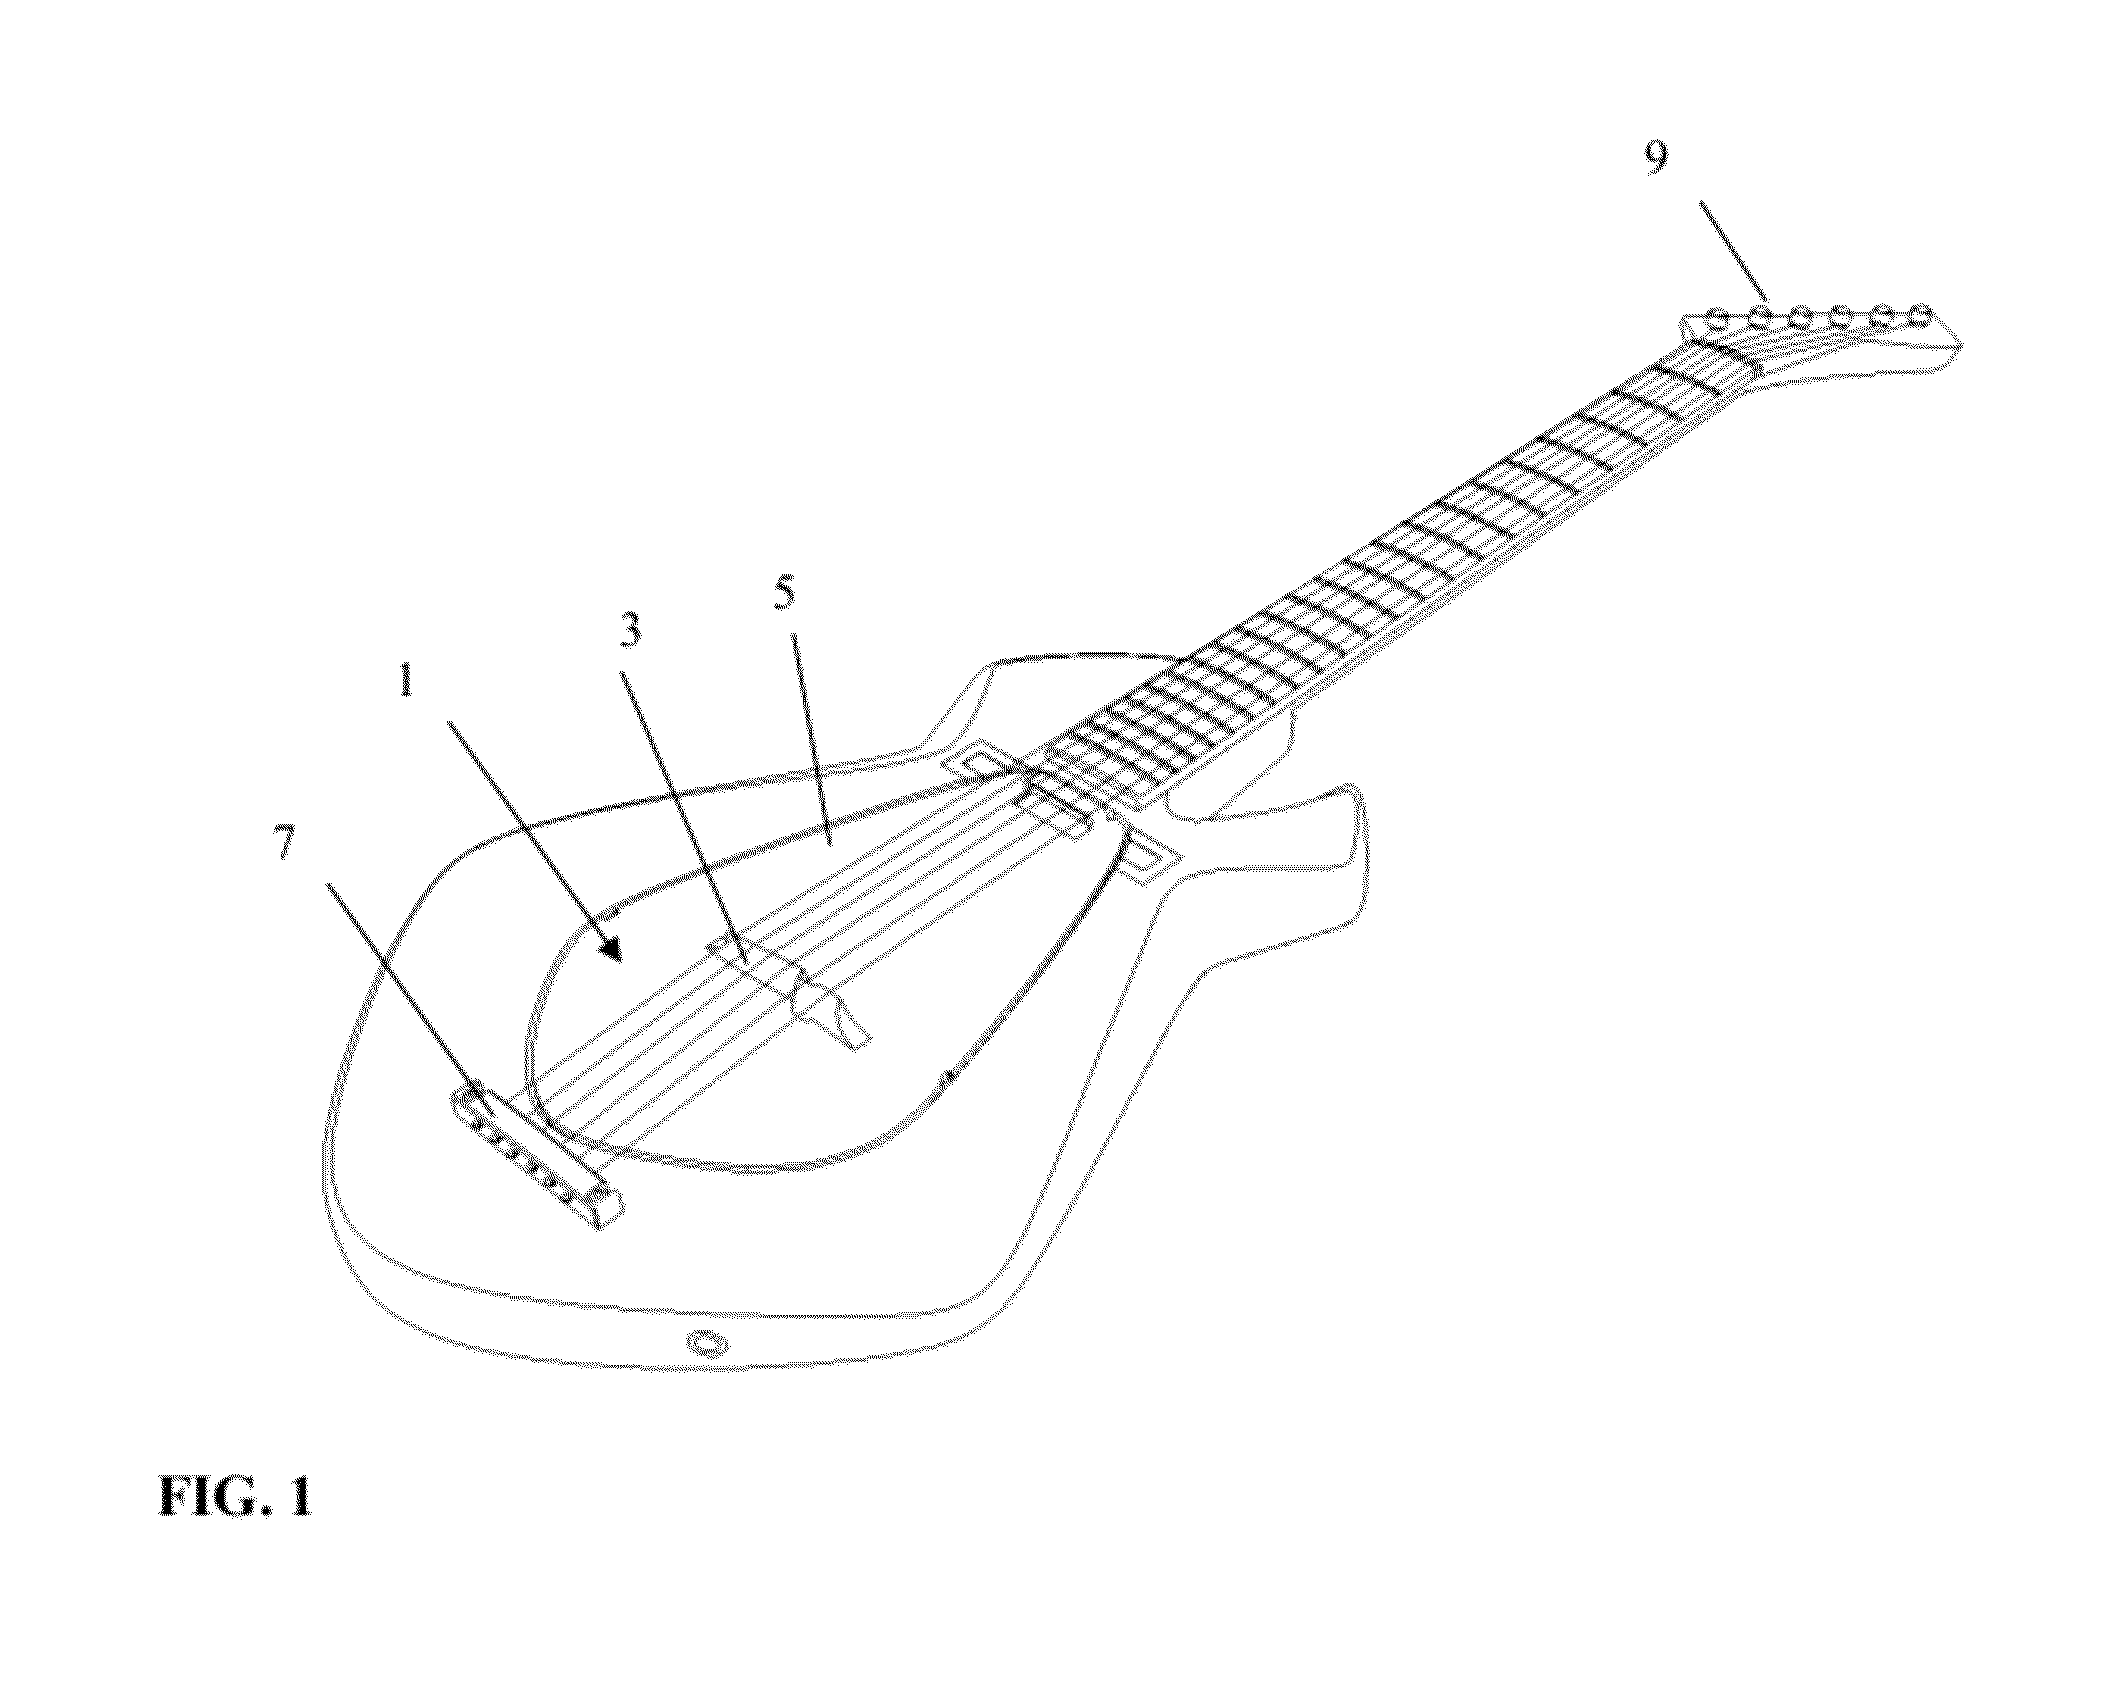 Digital instrument with physical resonator